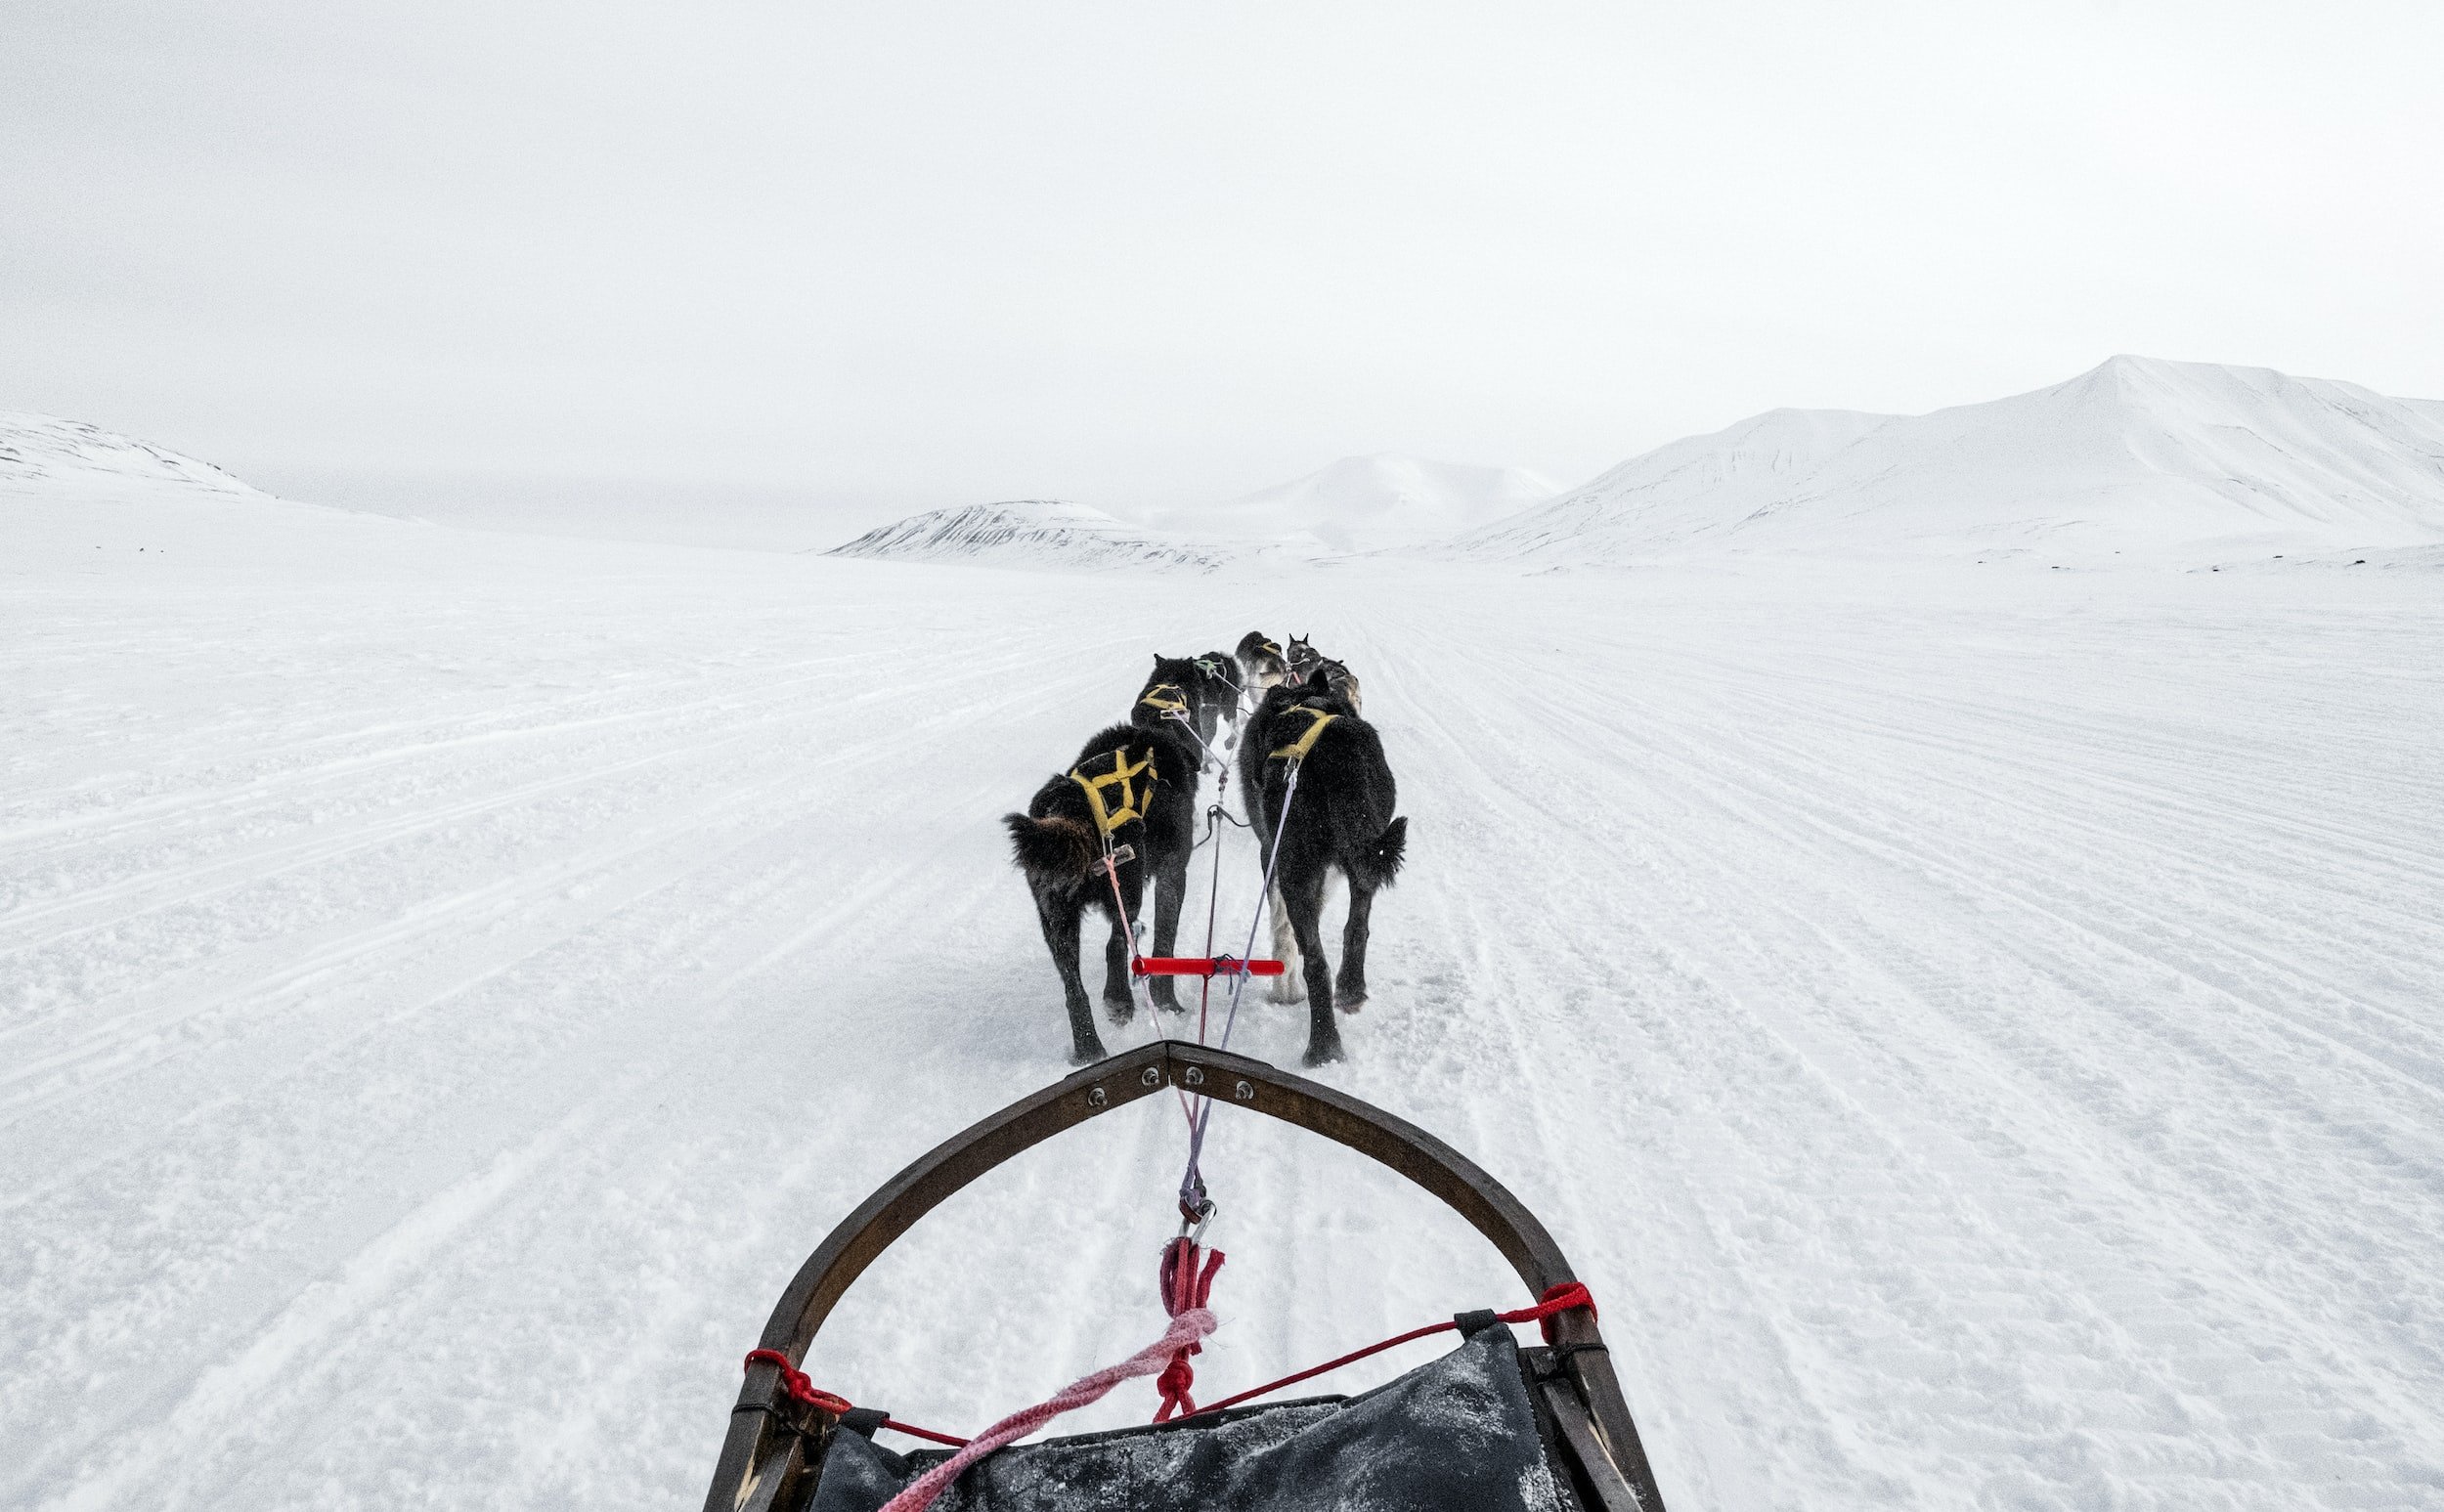 Dog sledding and sports activities at Méribel in the Alps